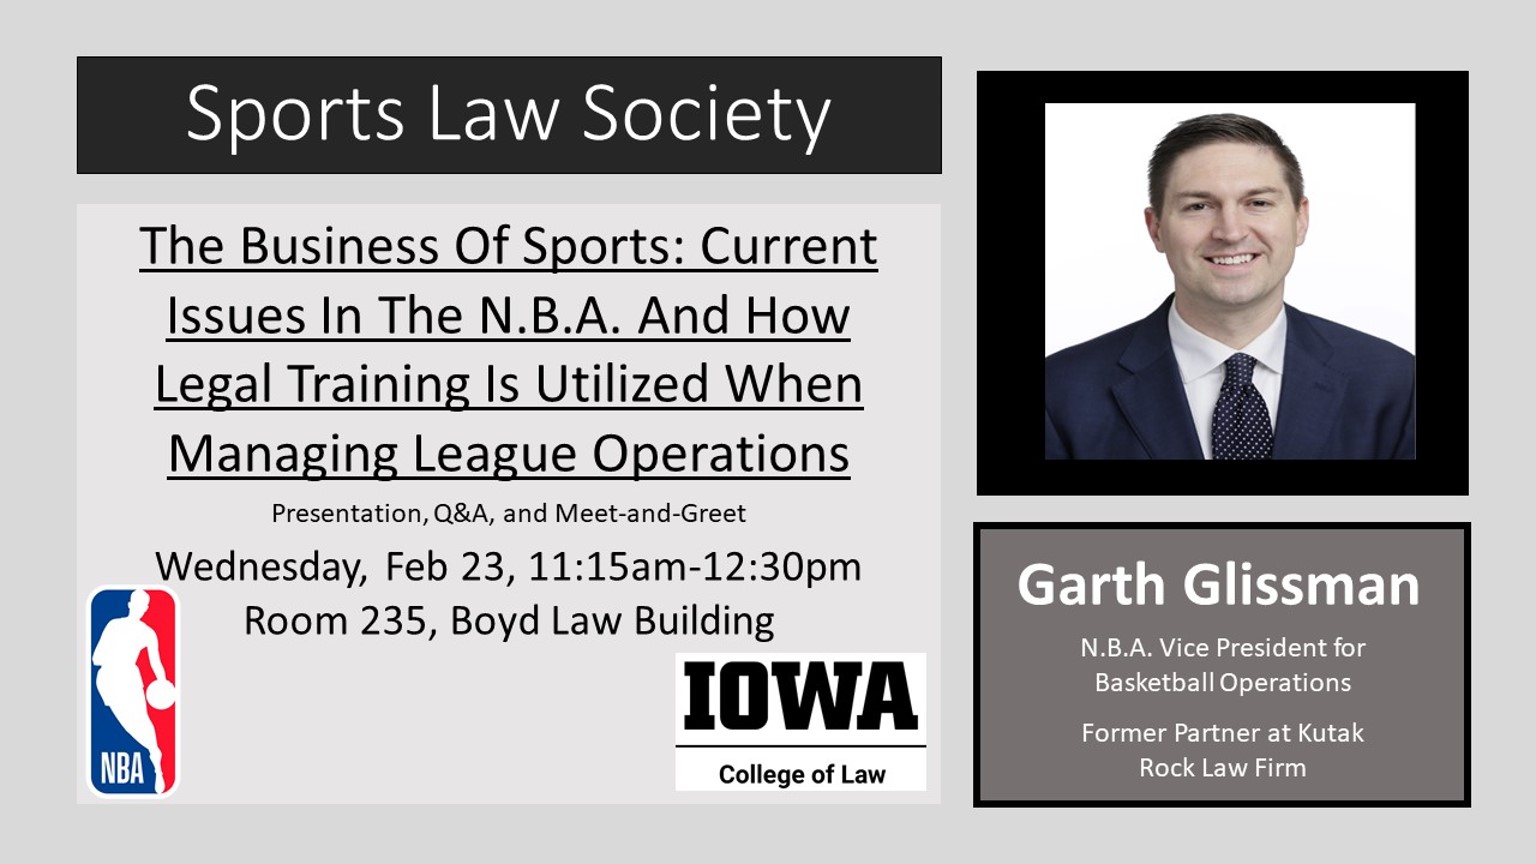    Sports Law Society presents Garth Glissman, NBA Vice President for Basketball Operations. The business of sports, current issues in the NBA and how legal training is utilized when managing league operations. Wednesday February 23, 11:15am-12:30pm. Room 235, Boyd Law Building